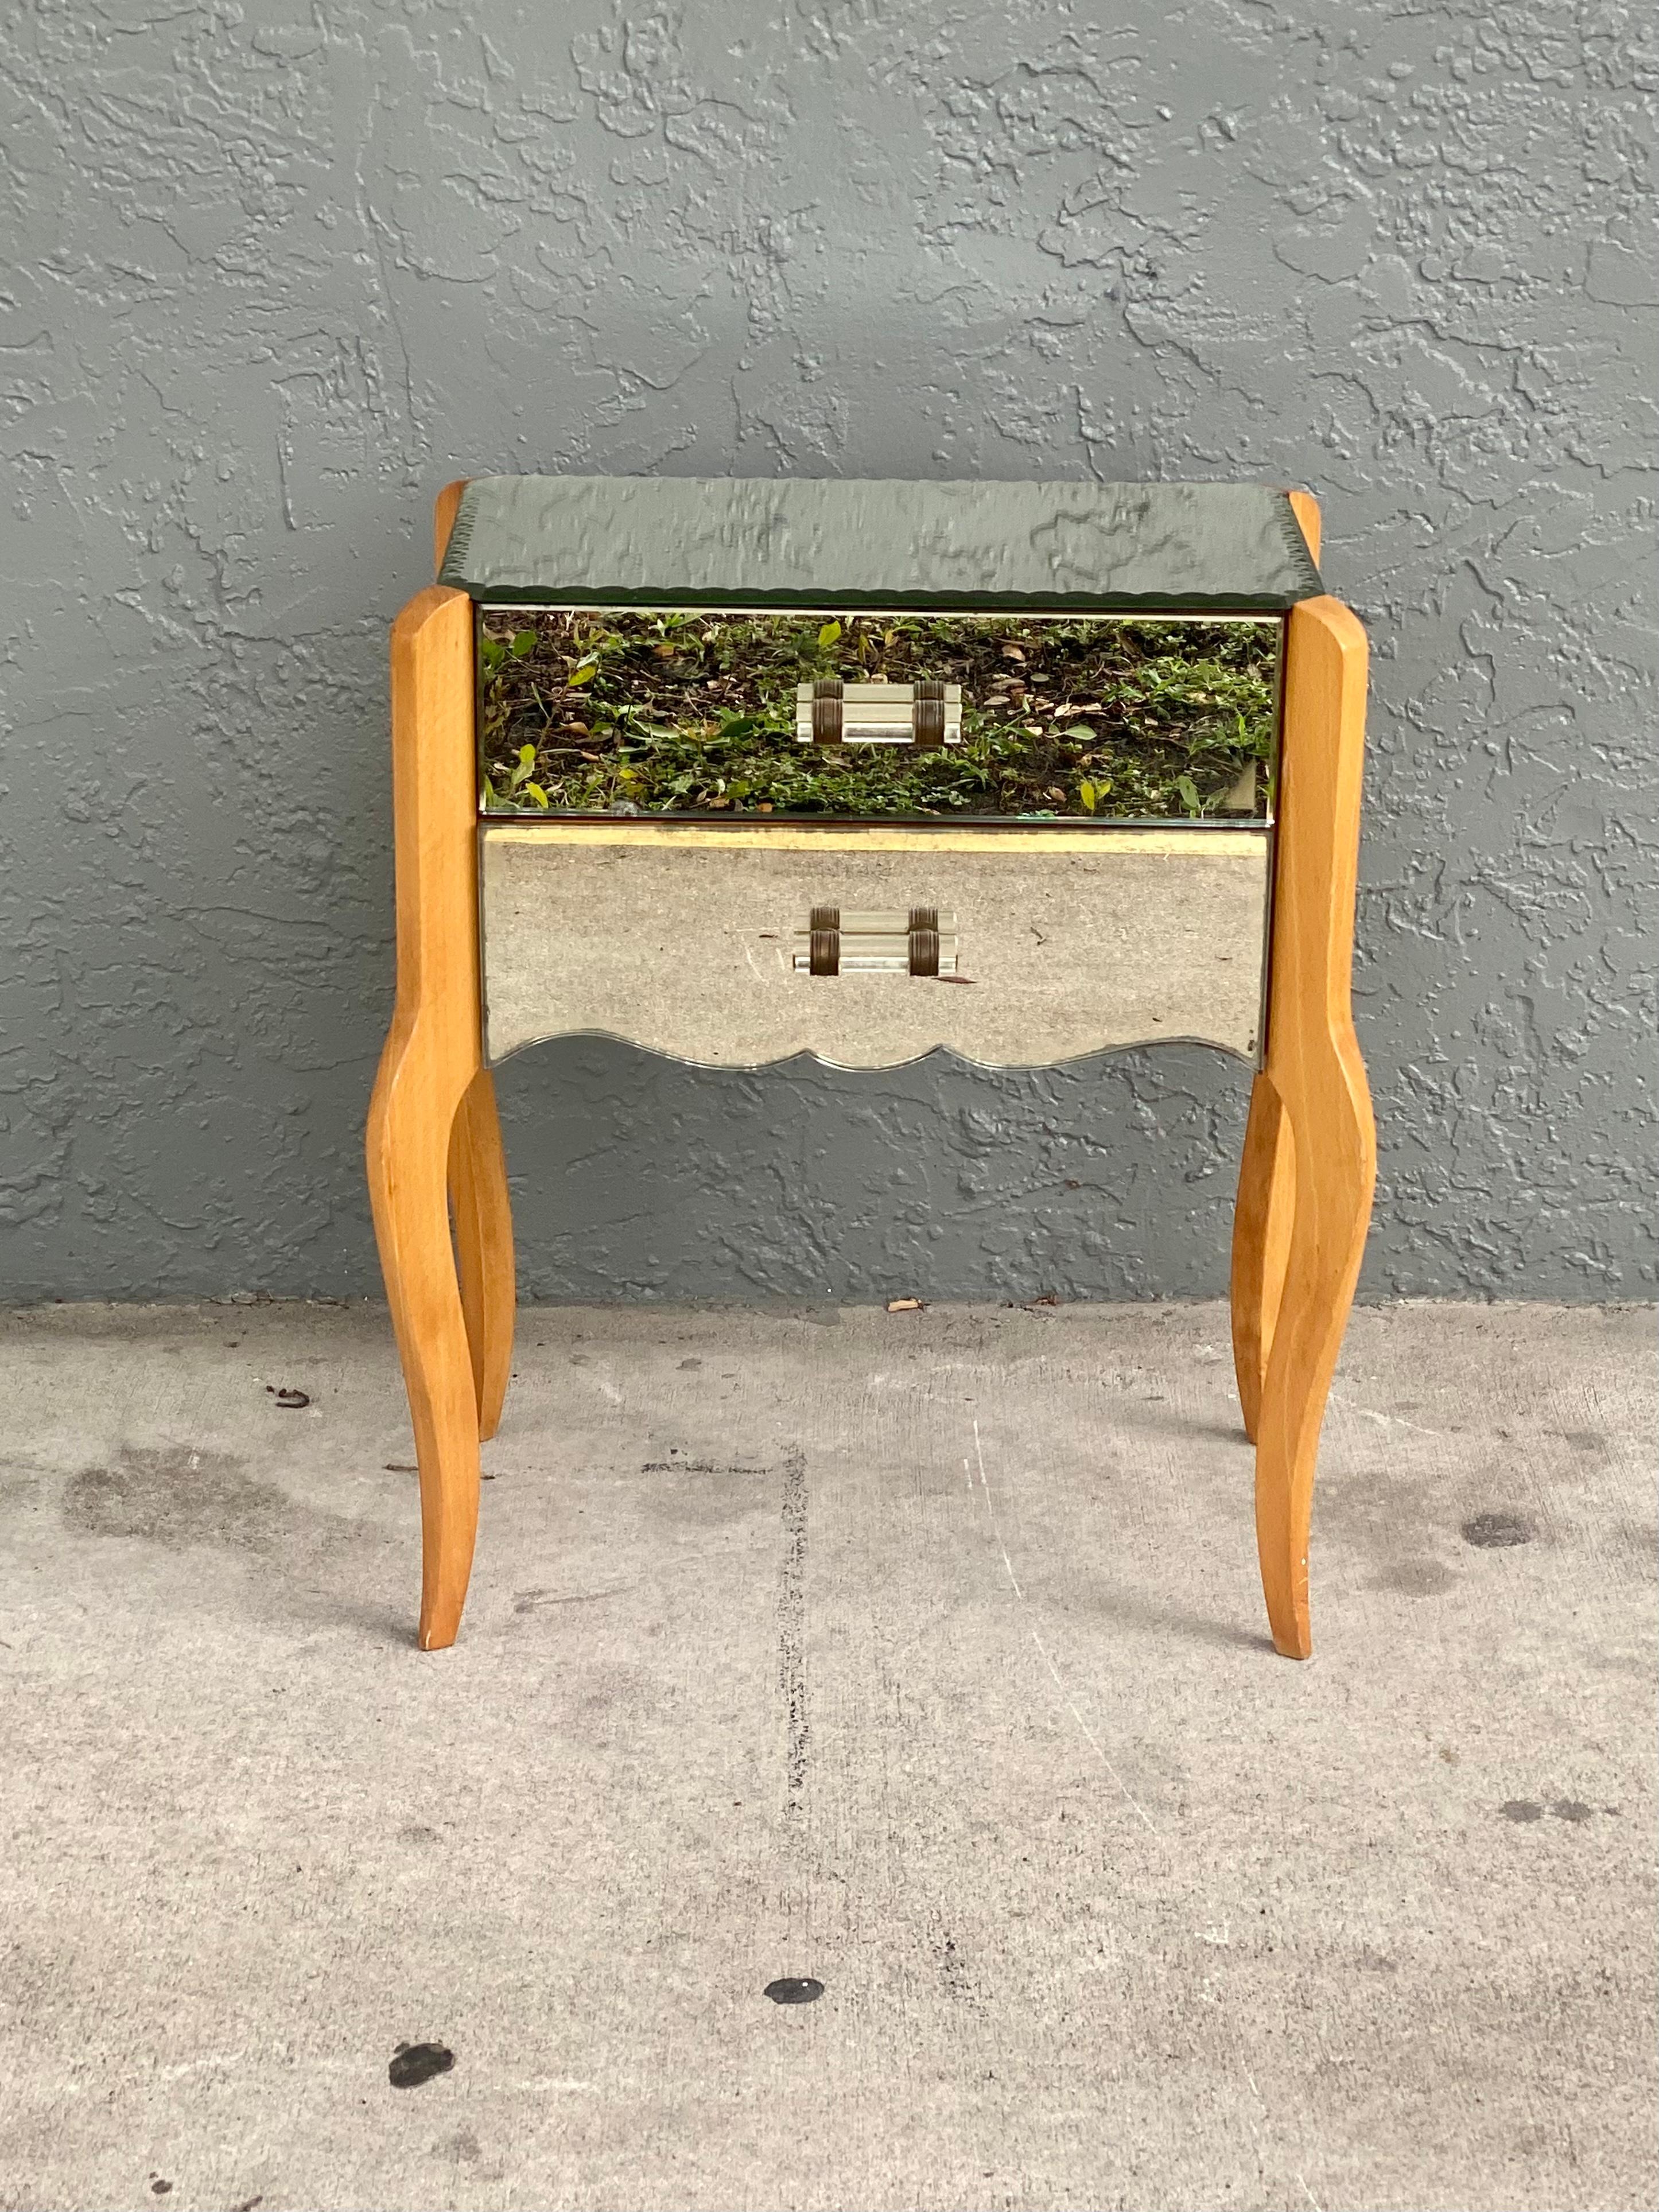 On offer on this occasion is one of the most stunning, night stand or end table you could hope to find. This is an ultra-rare opportunity to acquire what is, unequivocally, the best of the best, it being a most spectacular and beautifully-presented